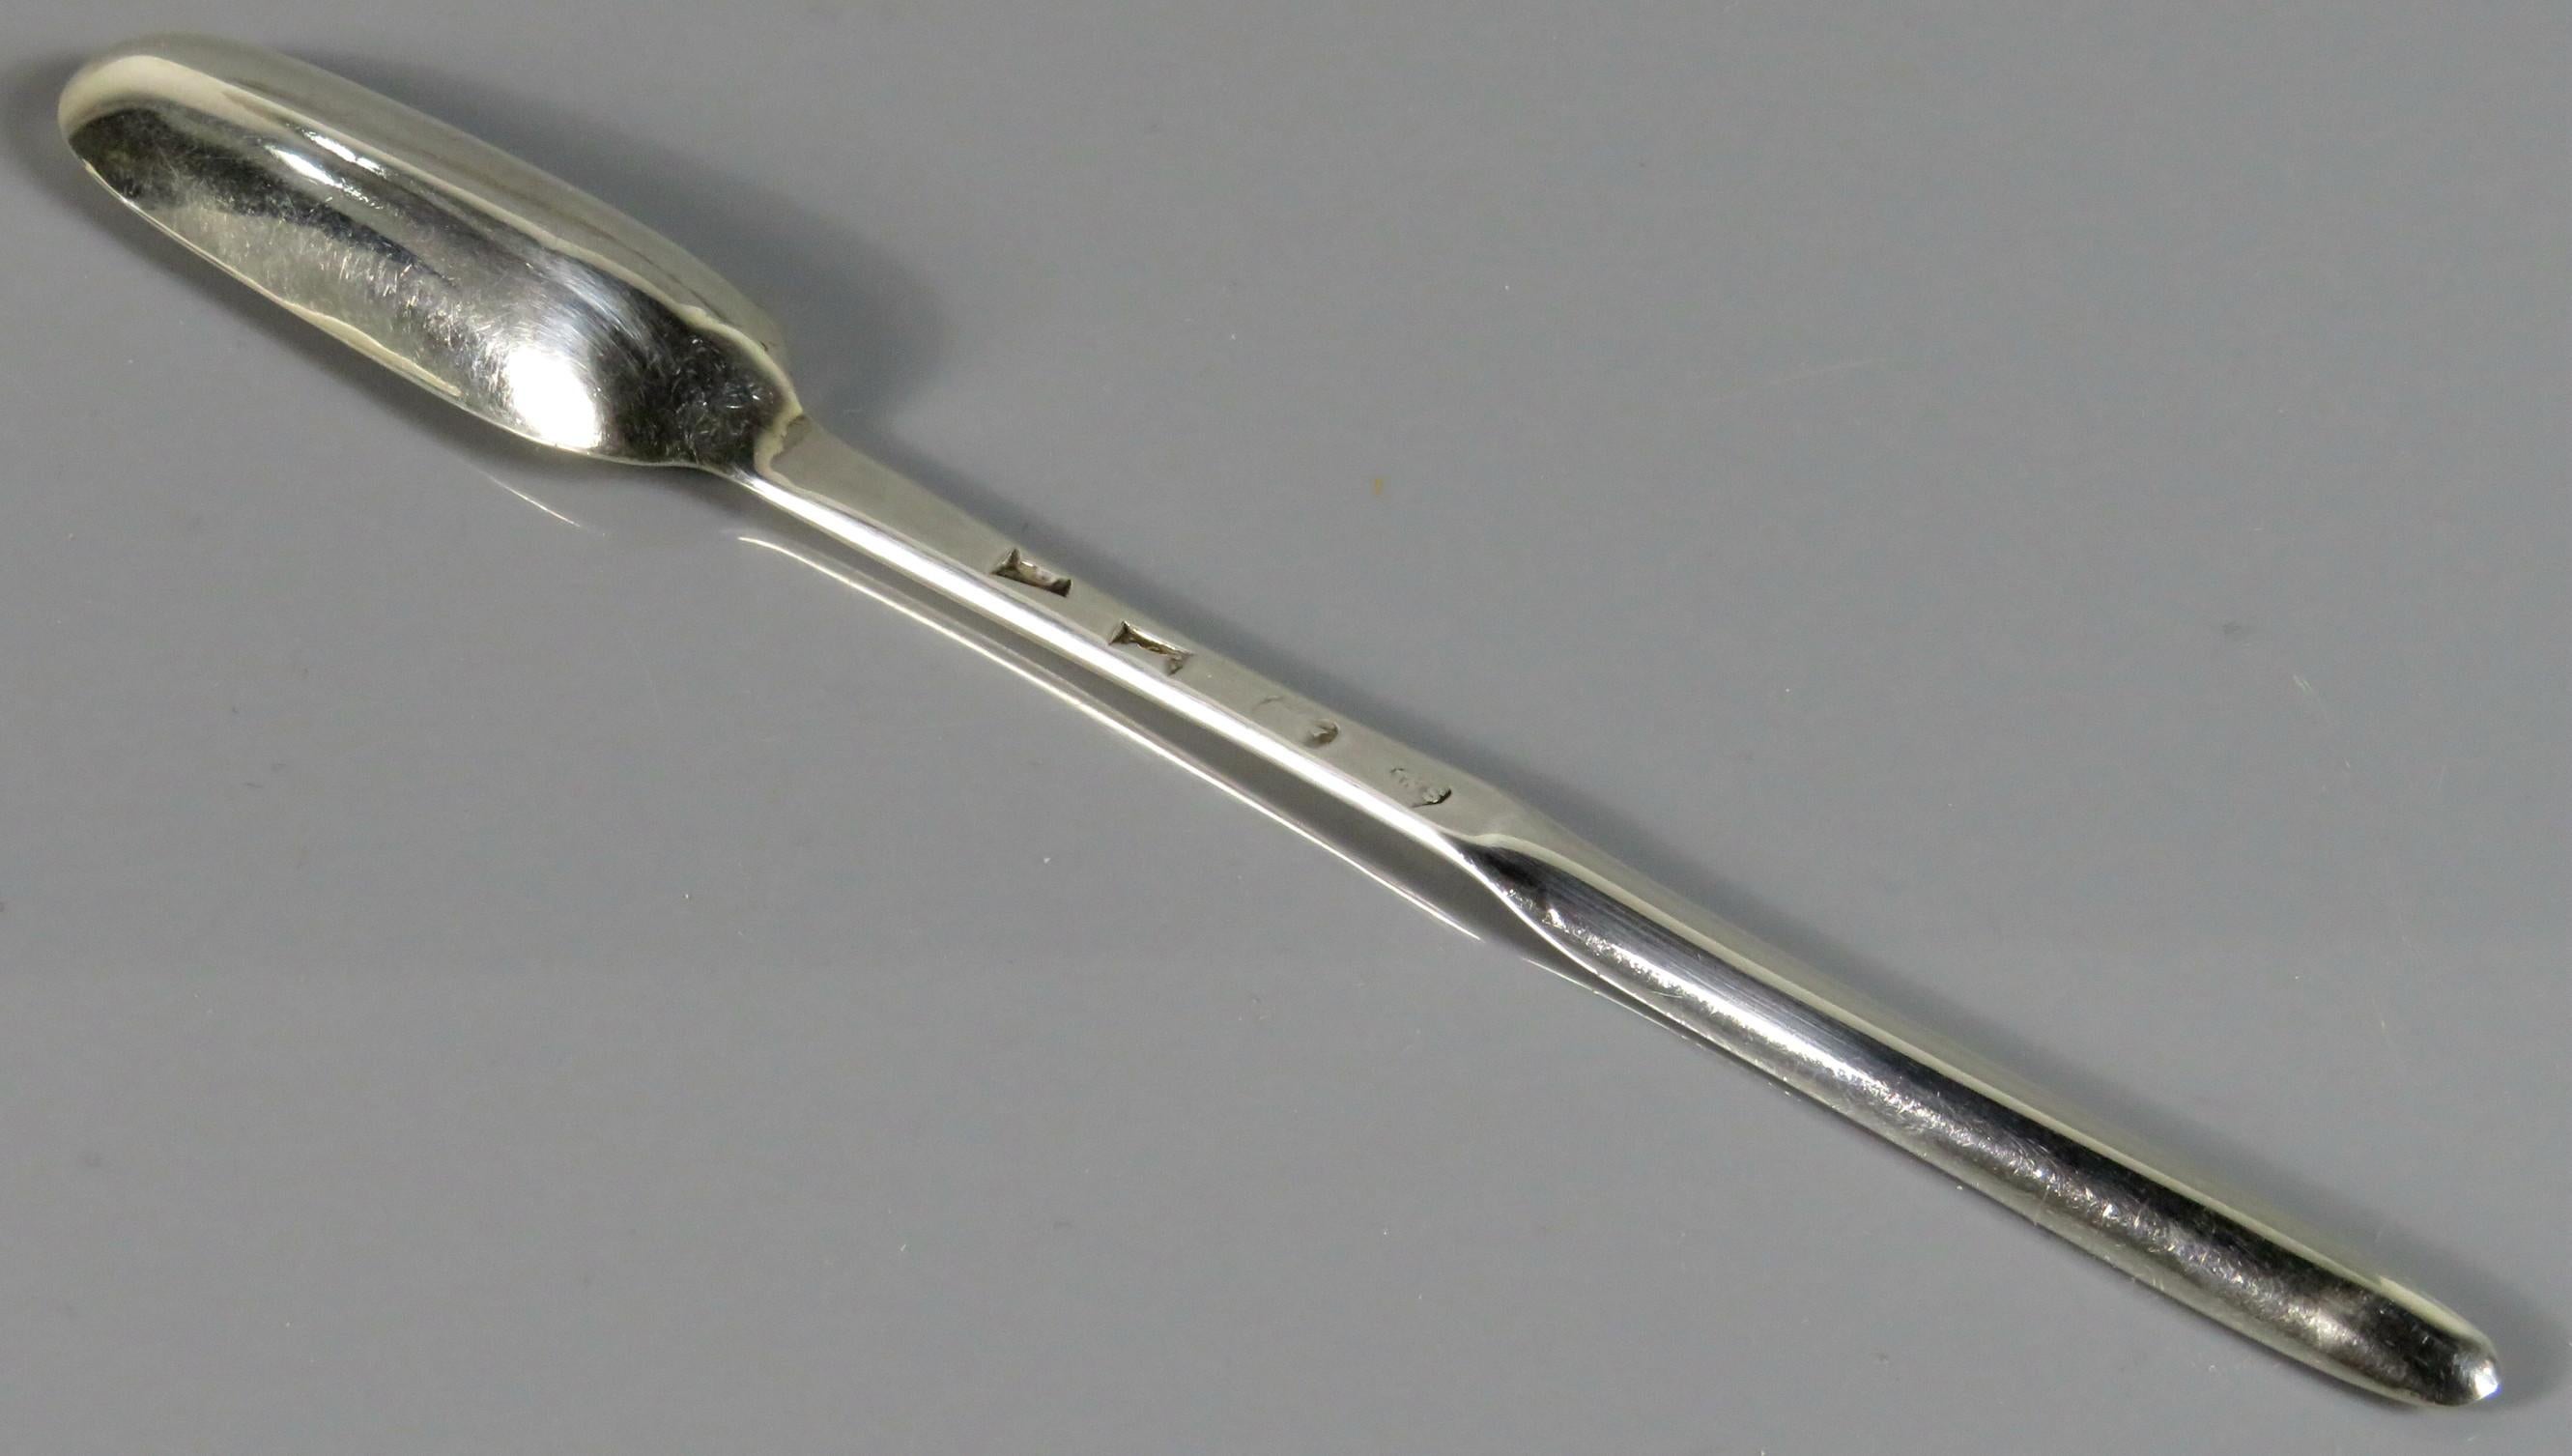 A rare George I sterling silver marrow scoop, showing an elongated bowl at either end of the flattened stem - the heel on the underside of the larger bowl showing a 'rat tail' element. The underside of the stem impressed with London hallmarks, date